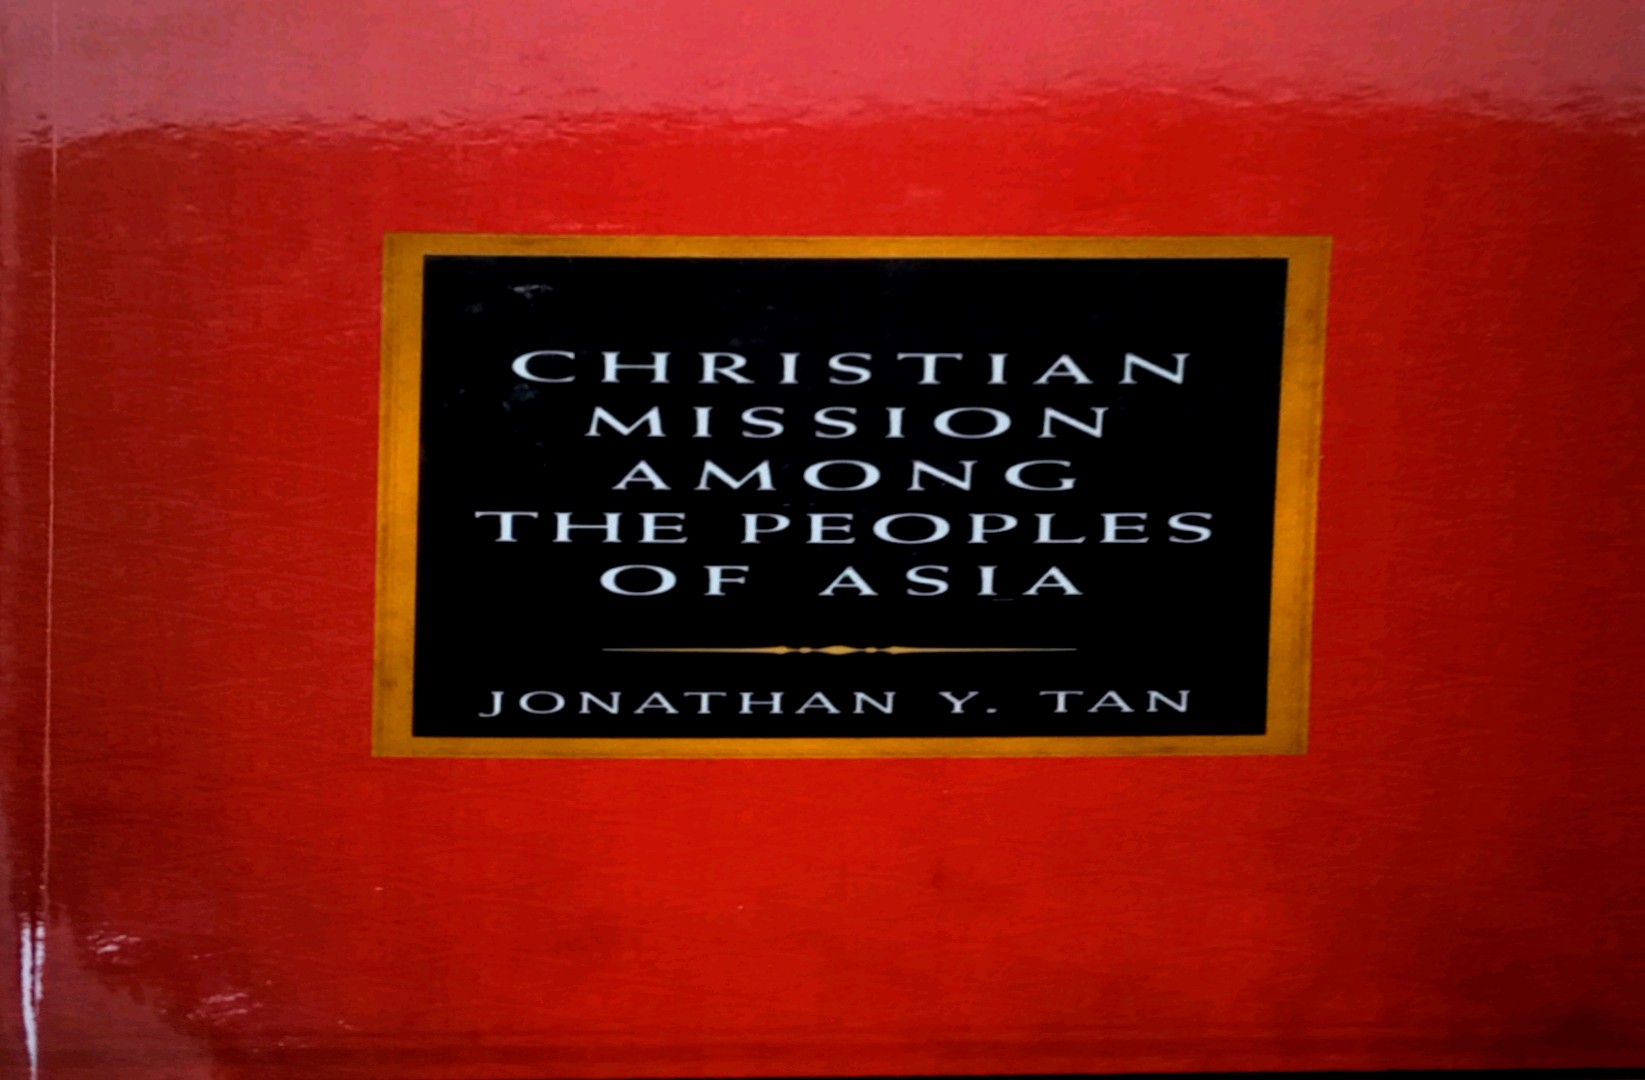 CHRISTIAN MISSION AMONG THE PEOPLES OF ASIA